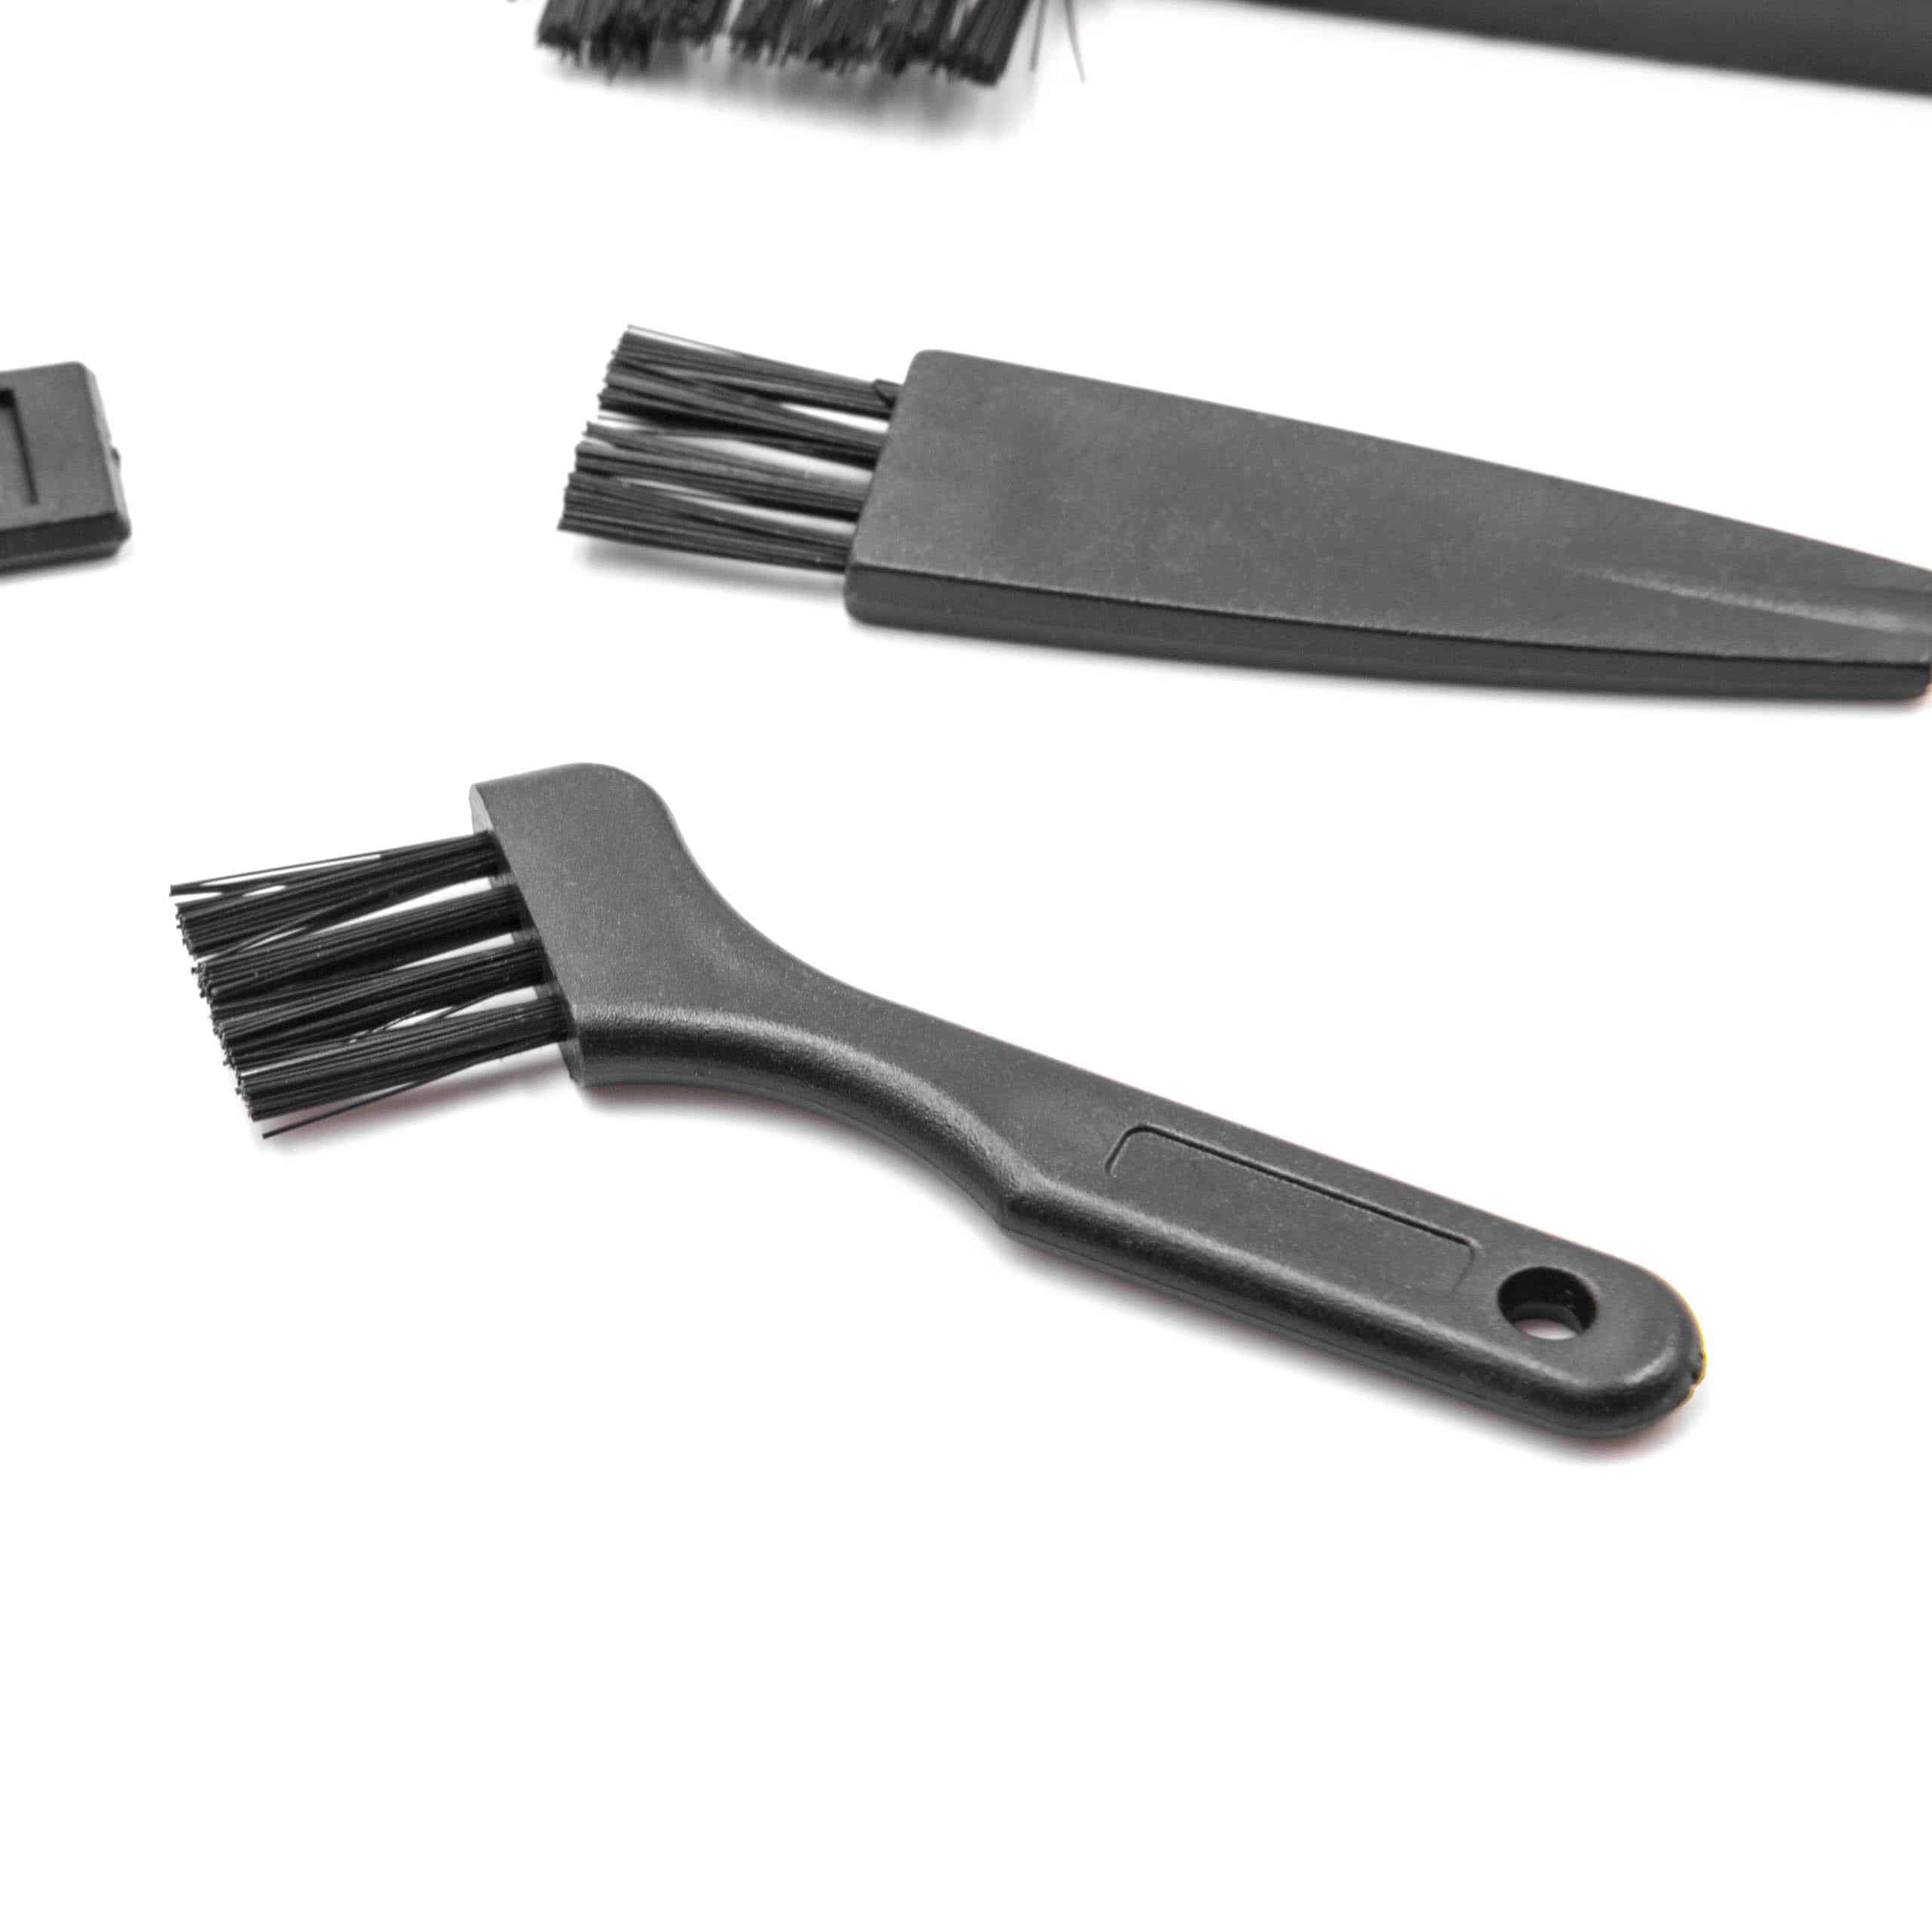 9x Cleaning Brush for Electric Razor, Beard Trimmer, Hair Clippers